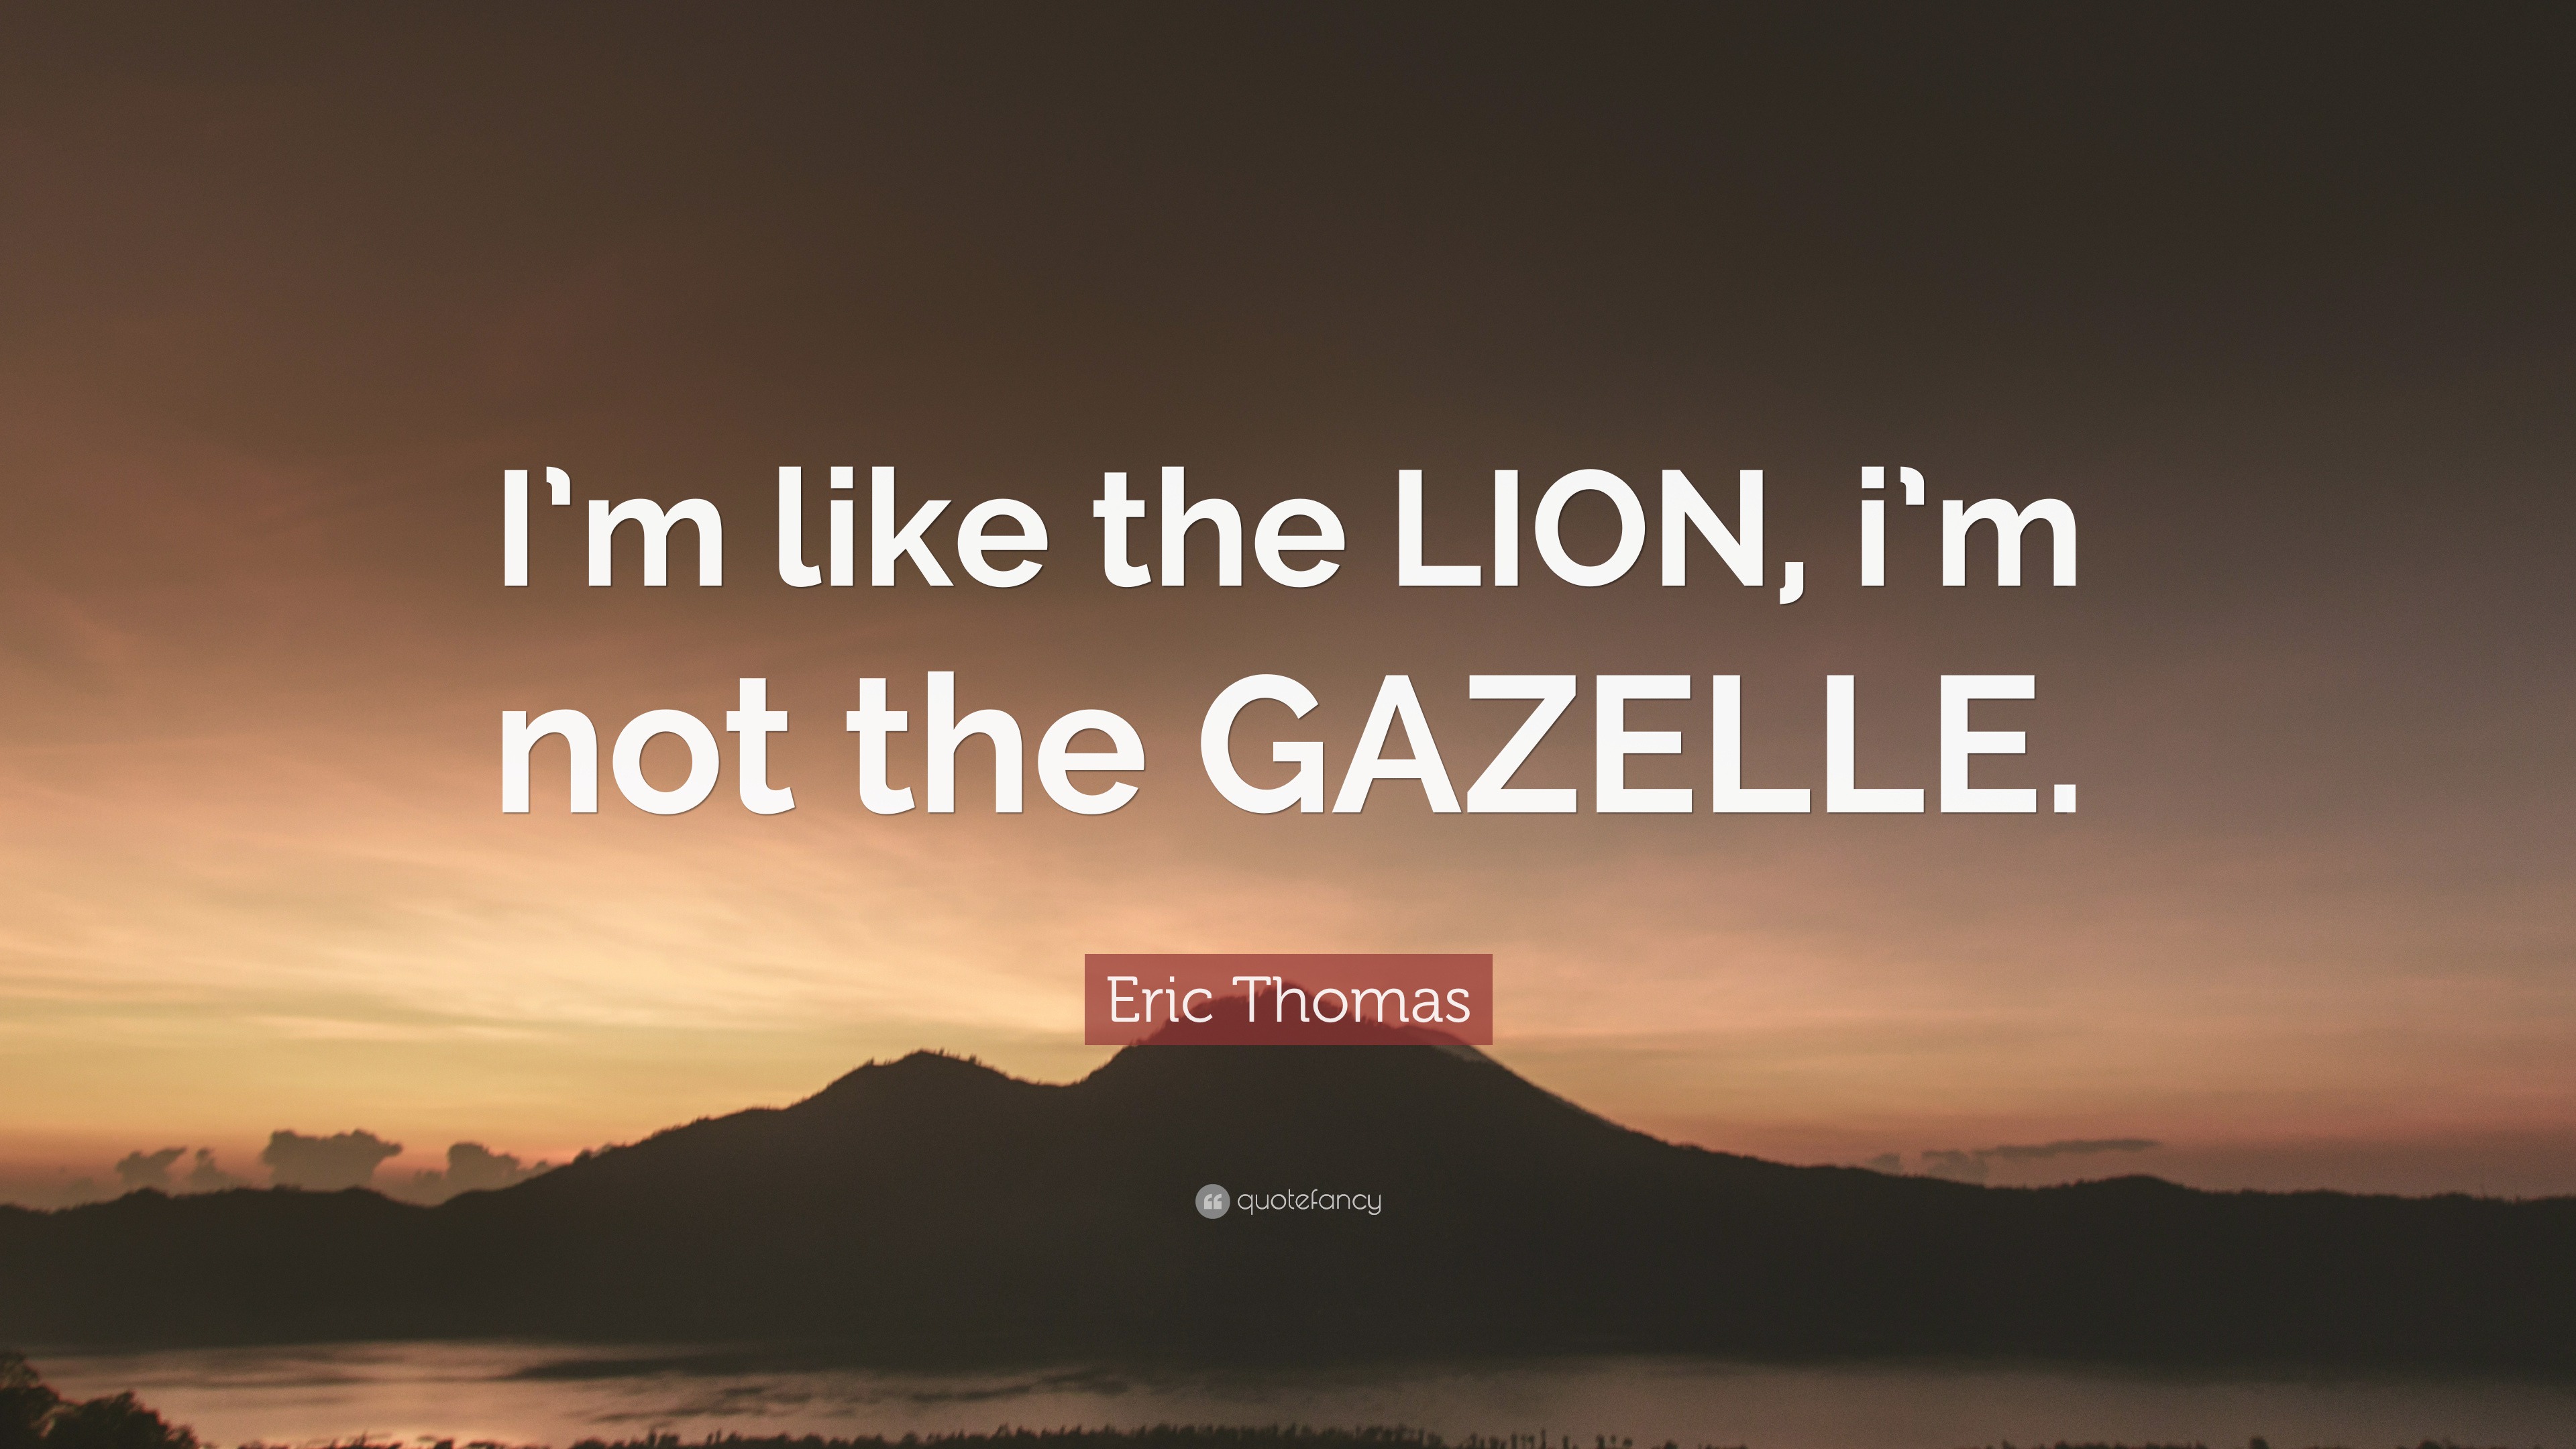 Eric Thomas Quote: "I'm like the LION, i'm not the GAZELLE." (12 wallpapers) - Quotefancy